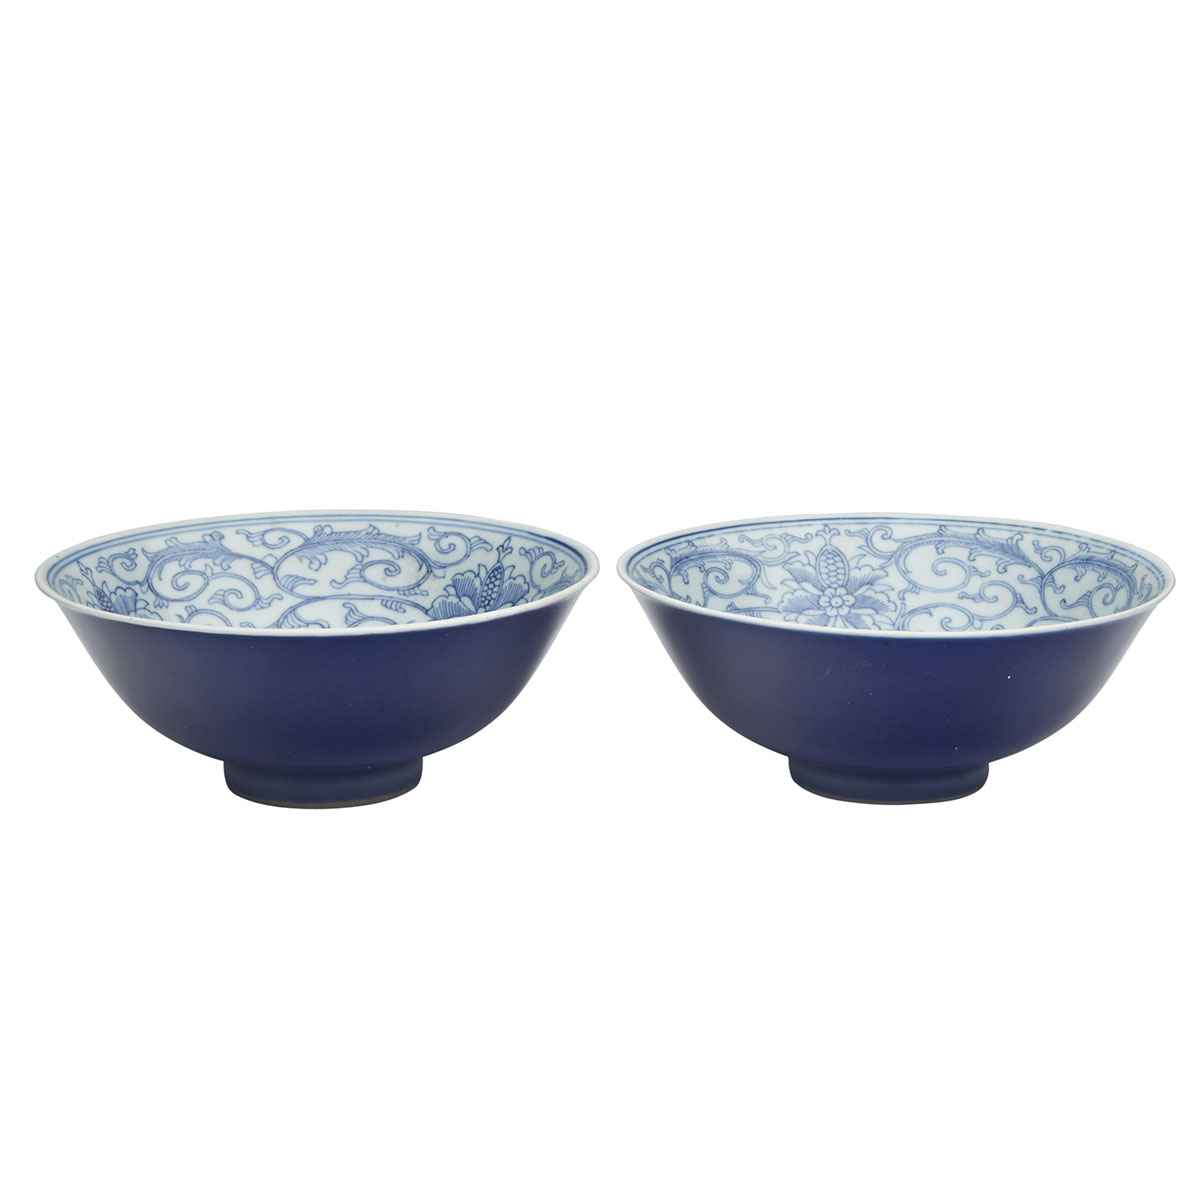 Pair of Sacrificial Blue Ground Bowls, Qianlong Mark and Period (1736-1795)